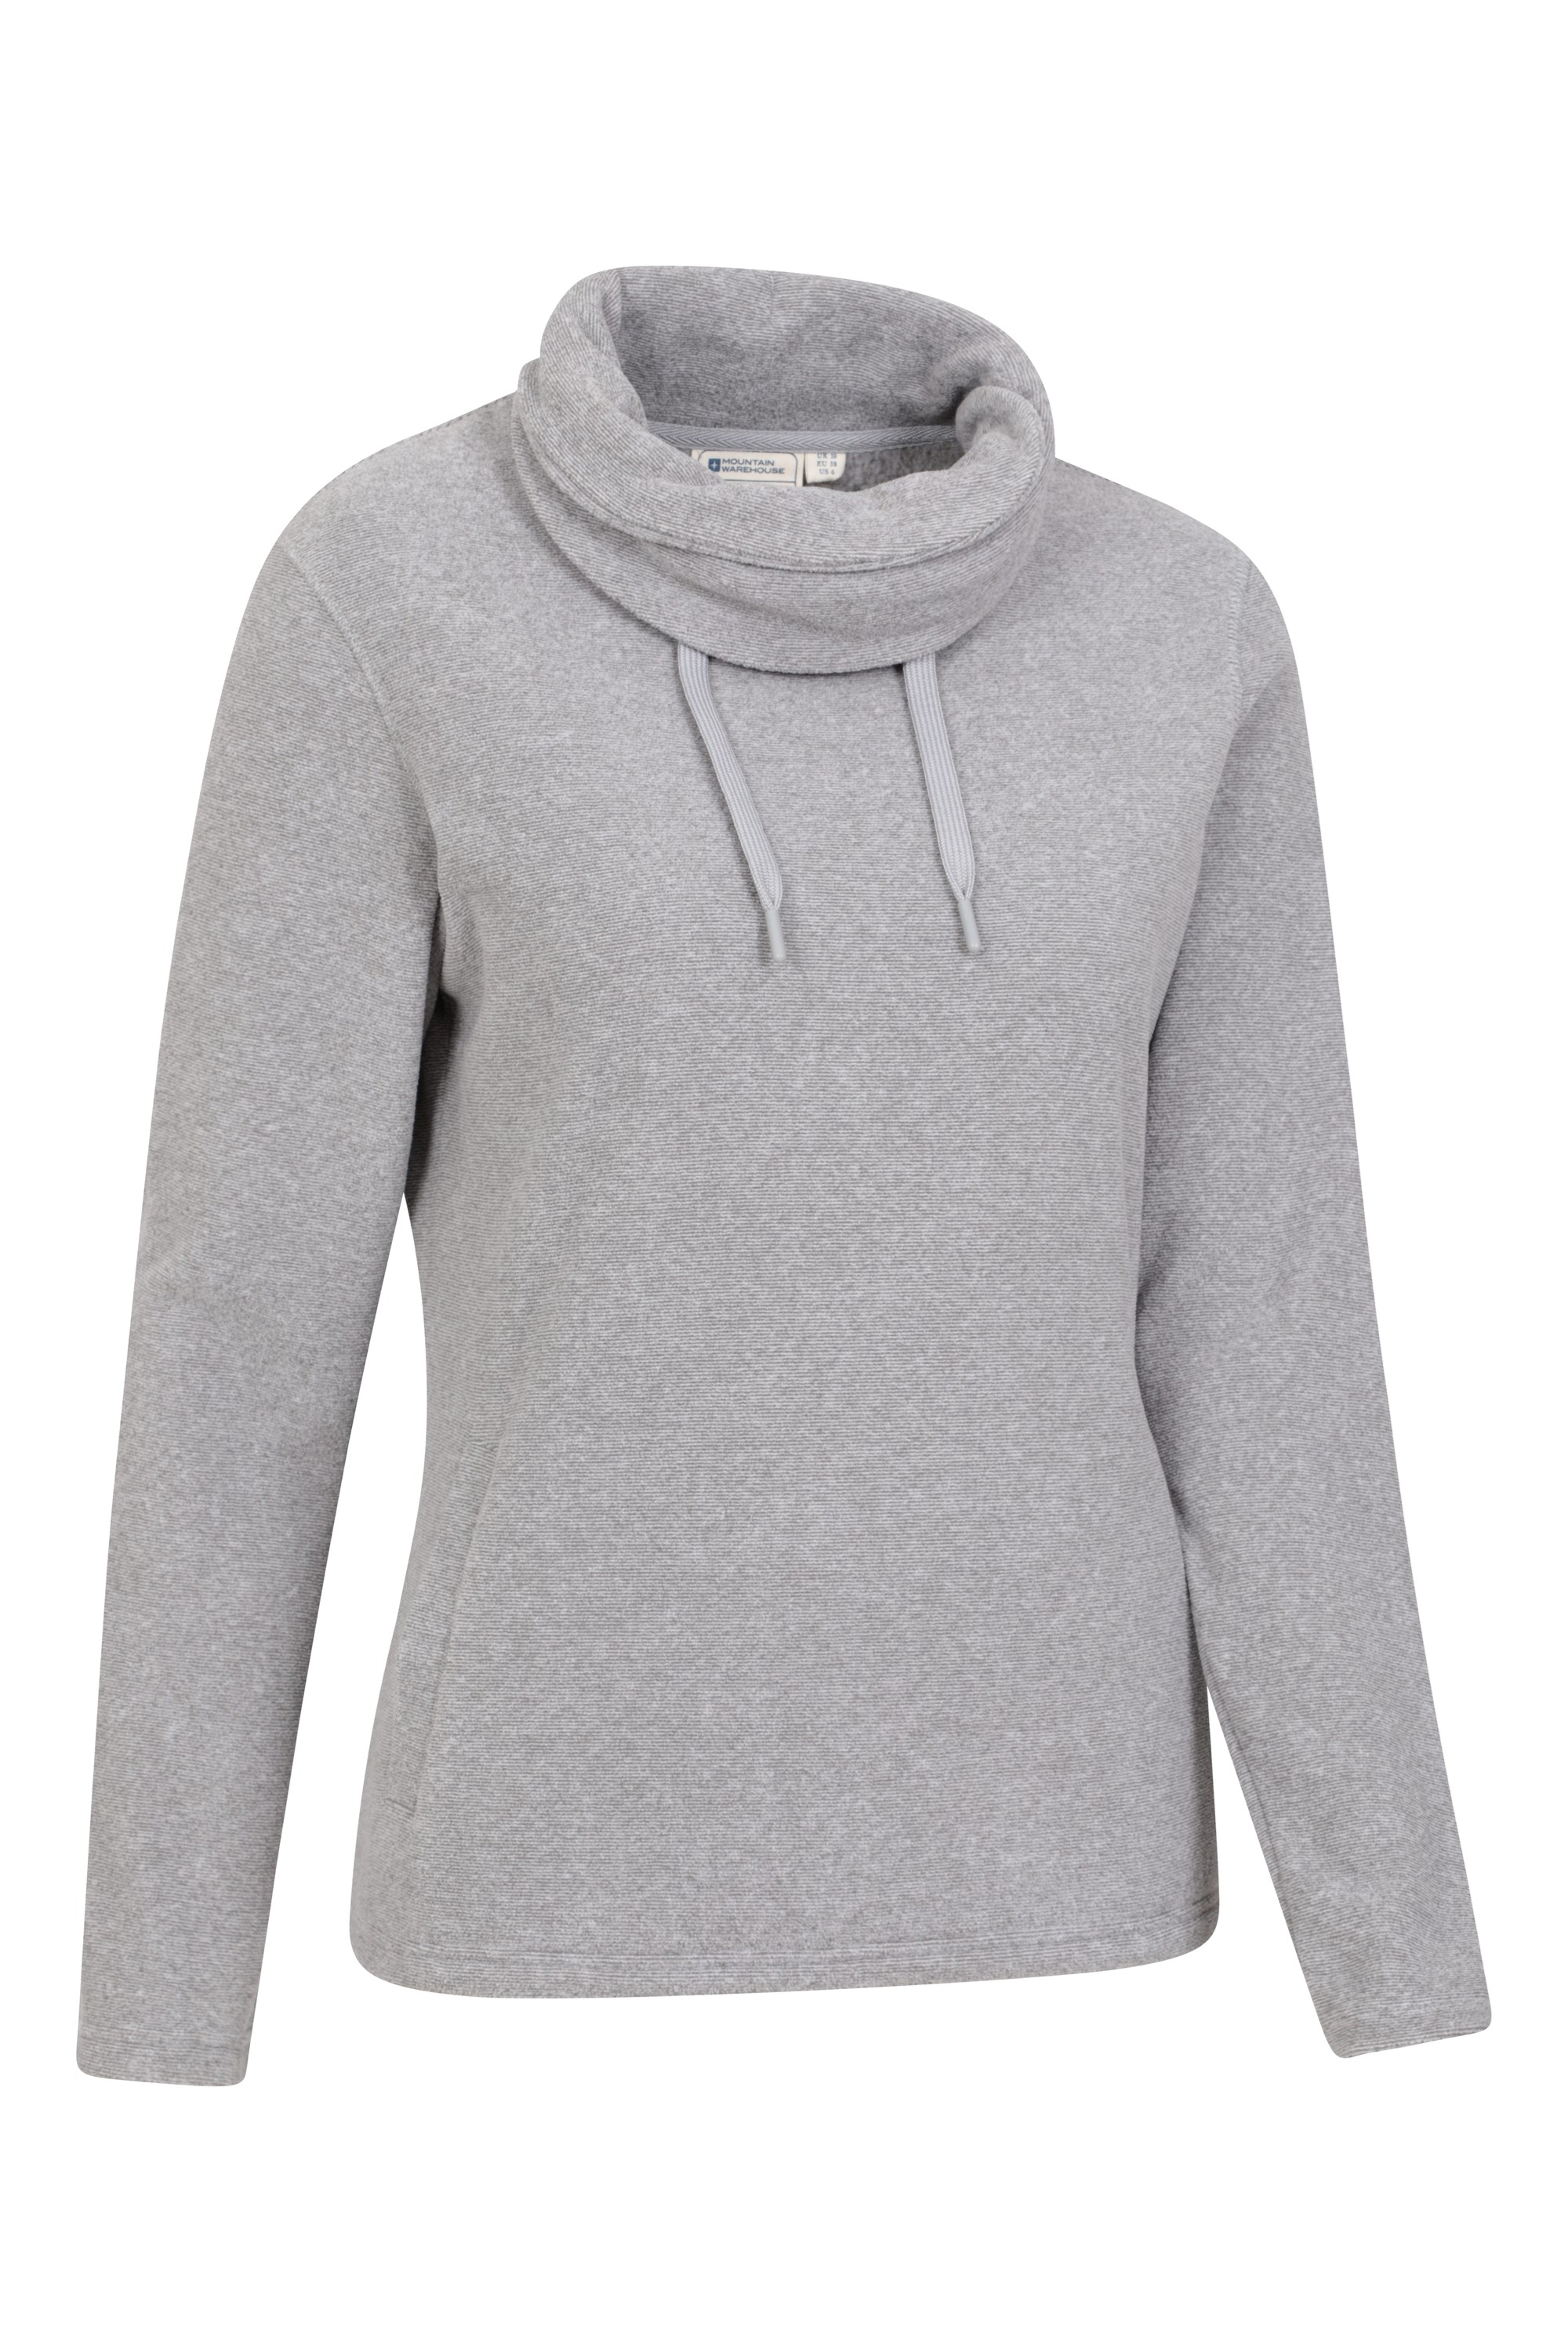  Dry Fit Running Pullover Womens - Fleece Cowl Neck Run Sweater  Jacket - Zip Pockets and Thumbholes Grey : Clothing, Shoes & Jewelry